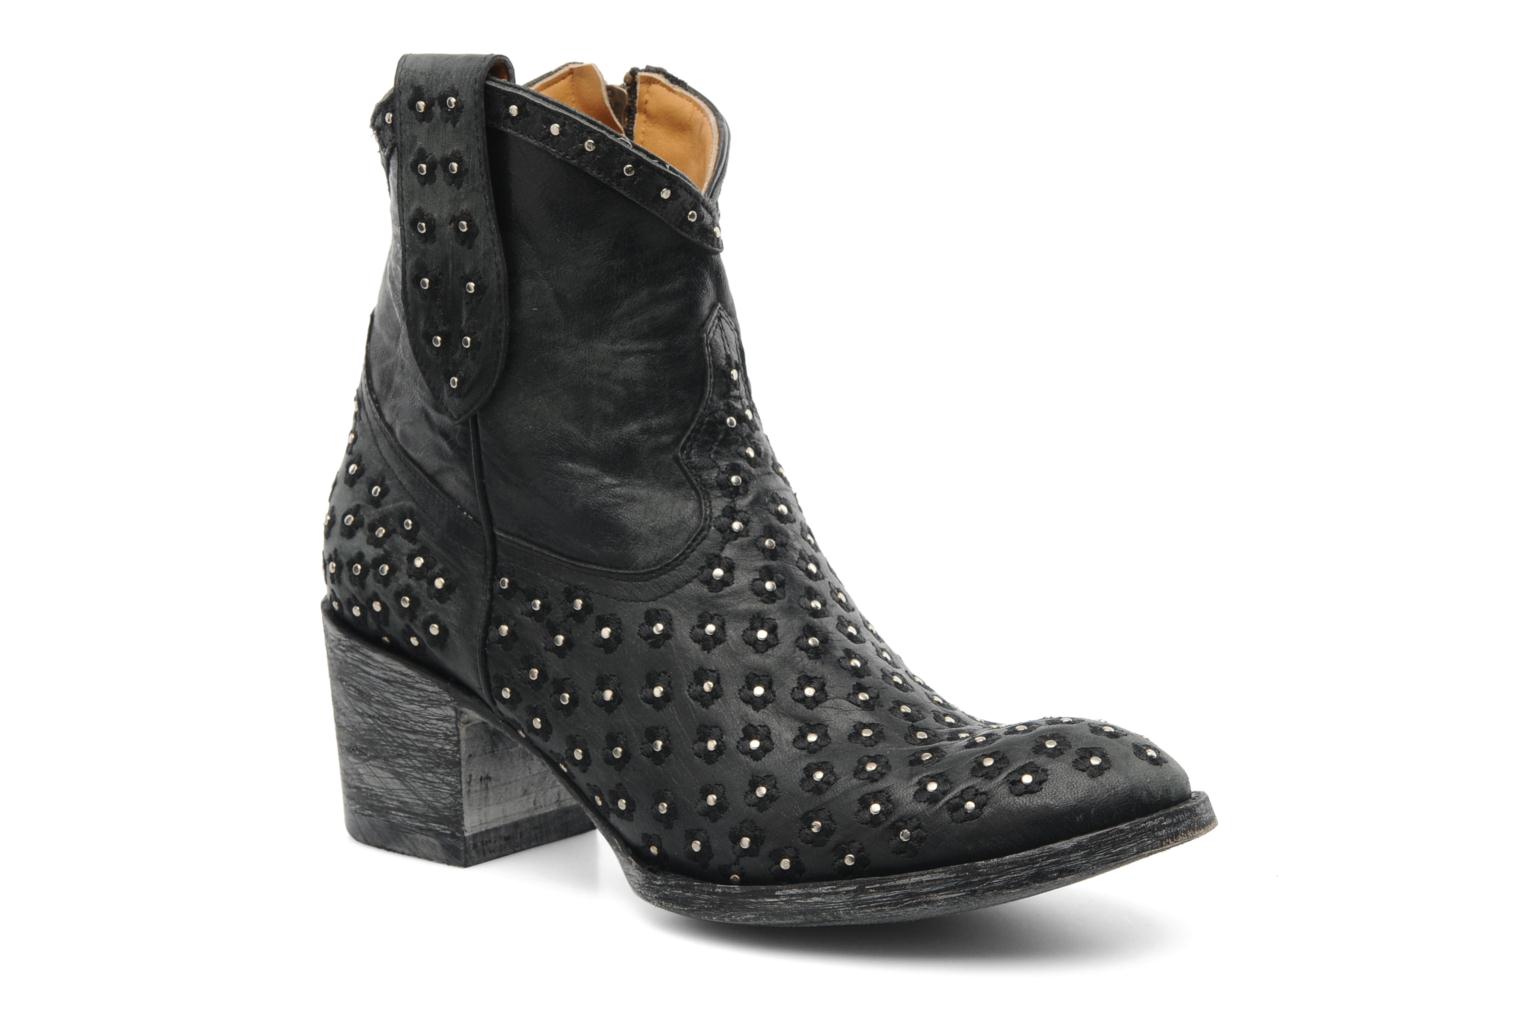 Mexicana Mary Ankle boots in Black at Sarenza.co.uk (194726)